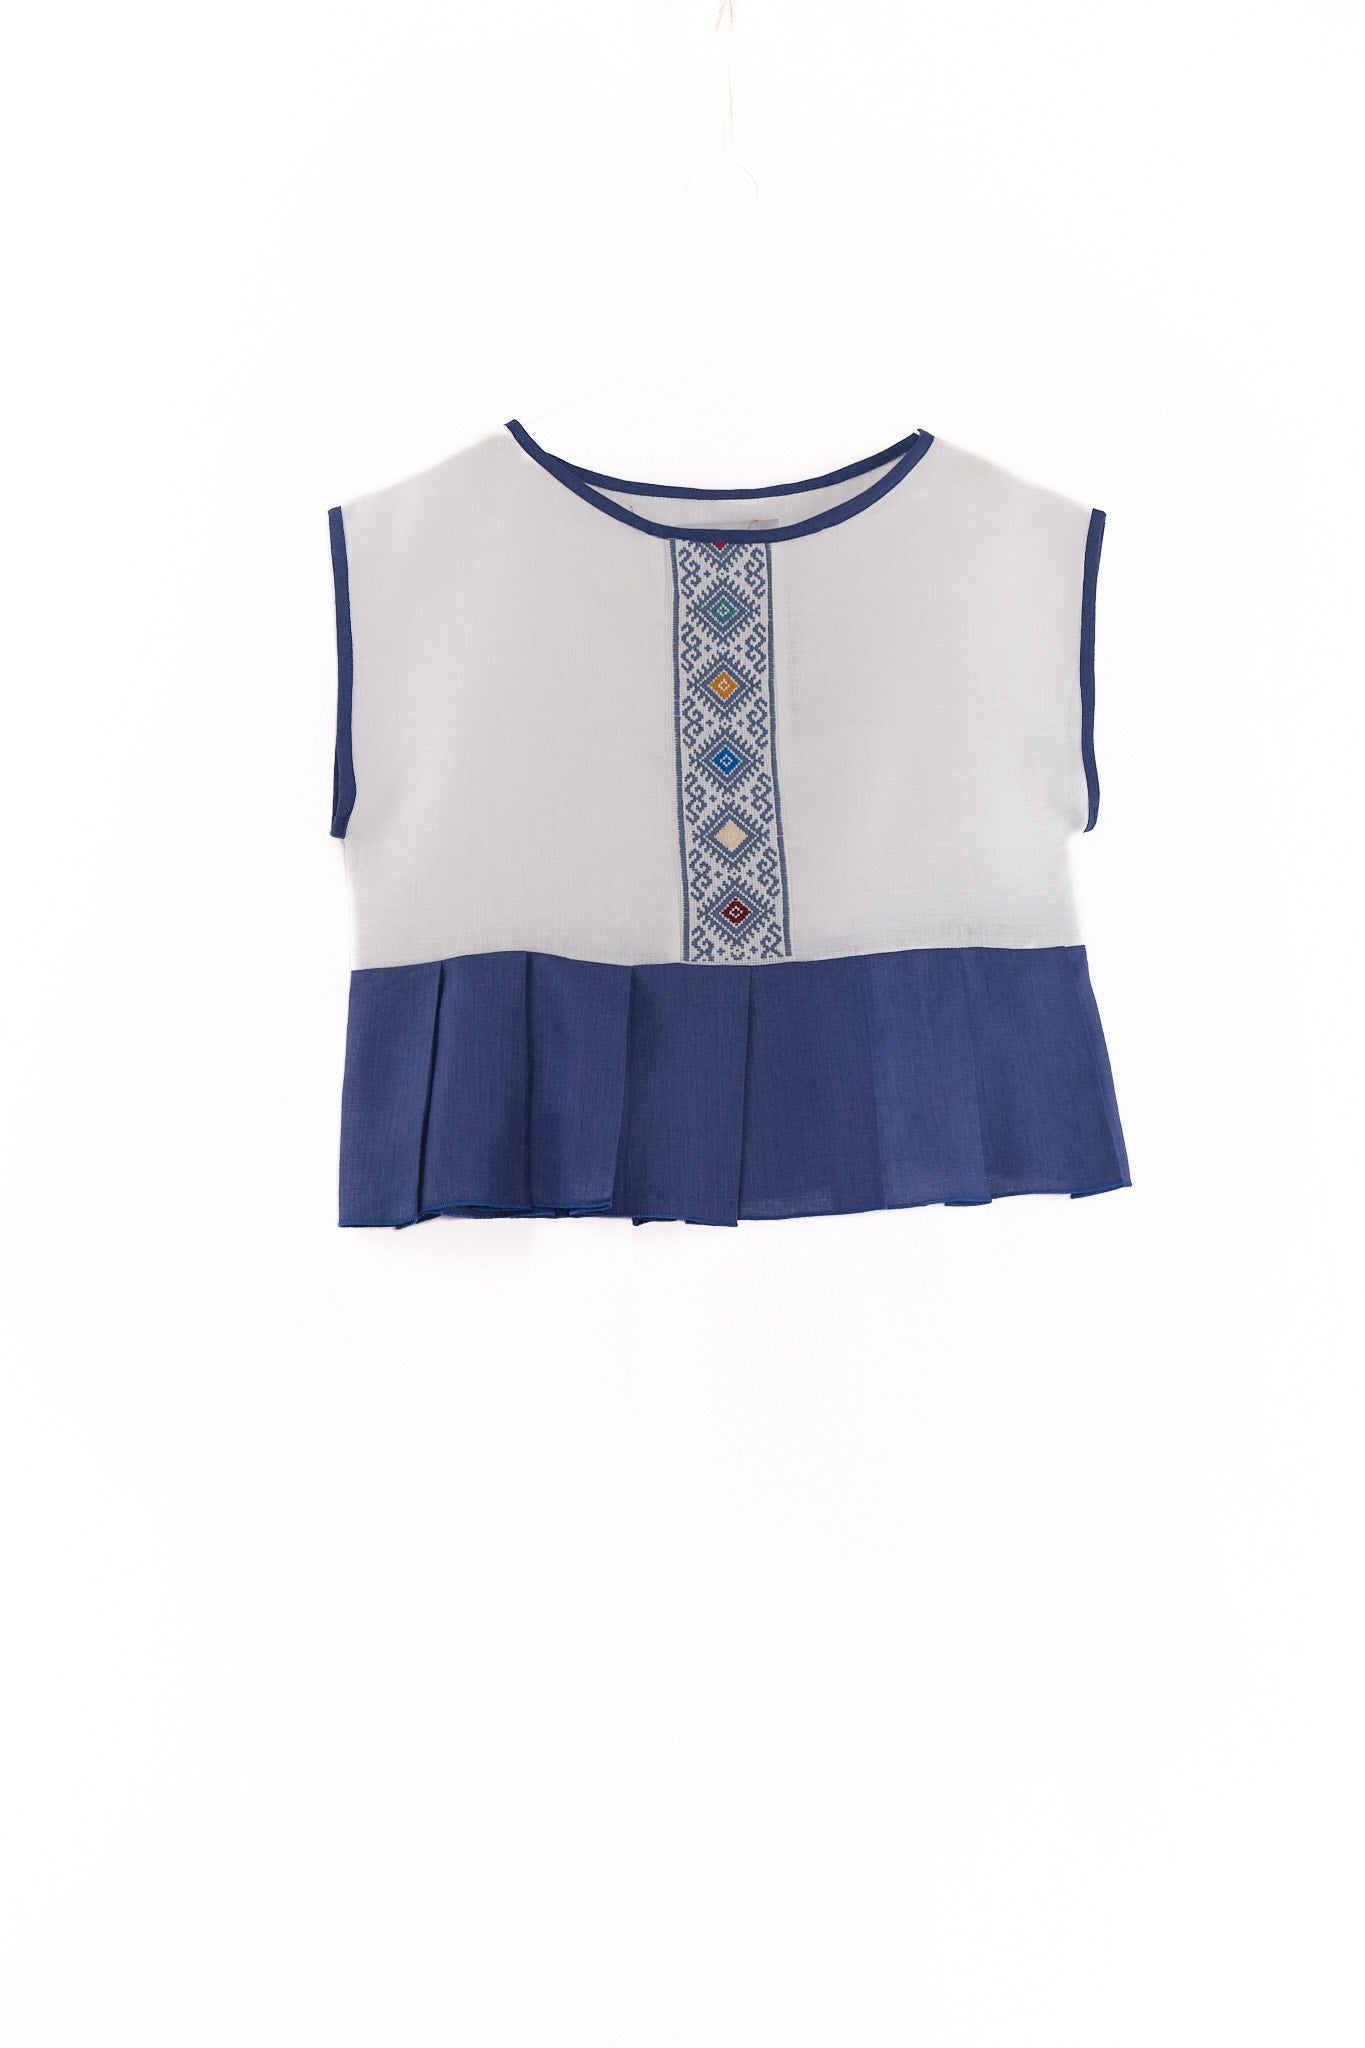 Lourdes crop top blouse white with blue embroidery garment